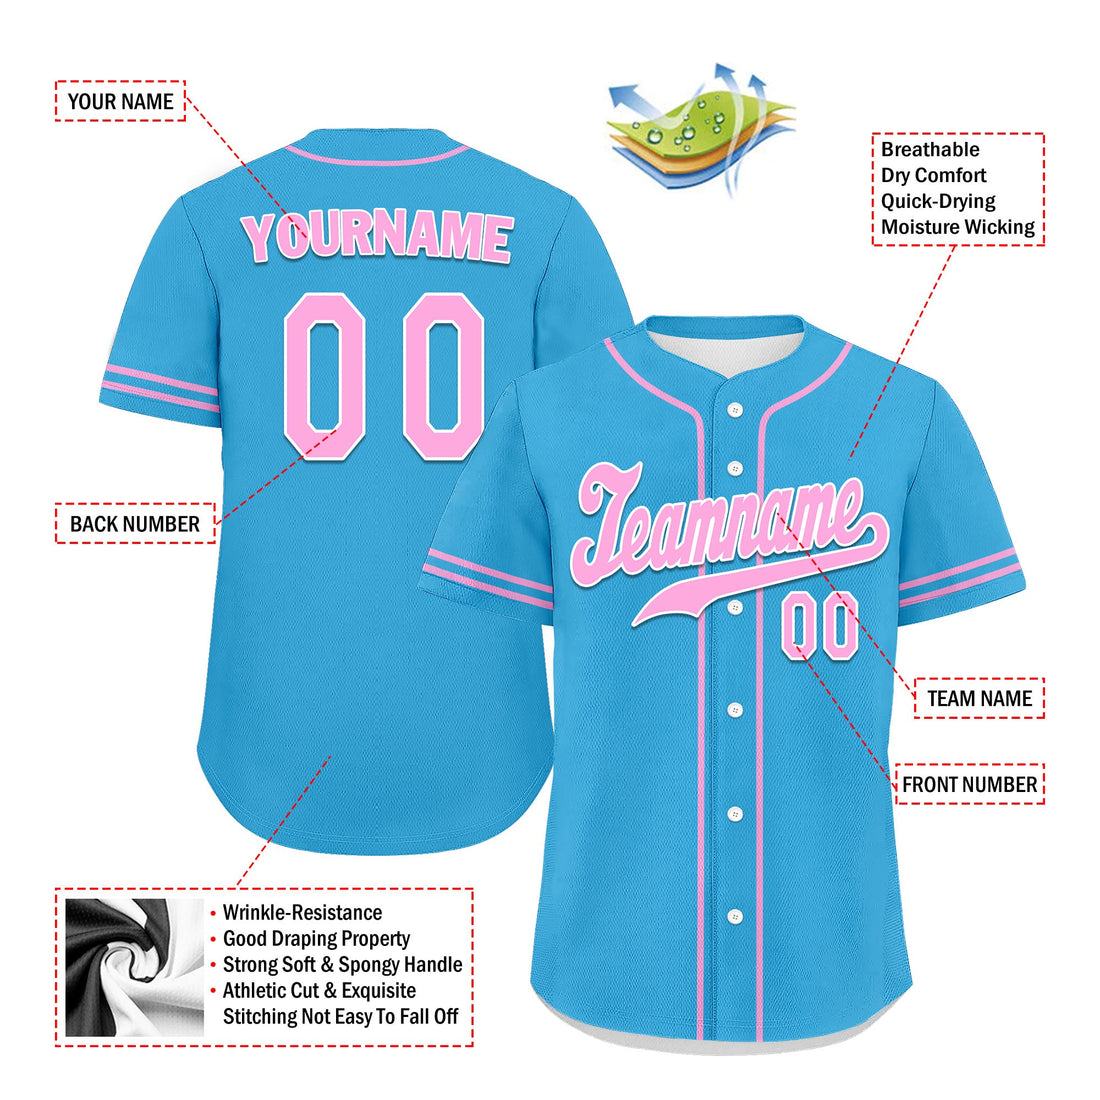 Custom Blue Classic Style Pink Personalized Authentic Baseball Jersey UN002-bd0b00d8-cd